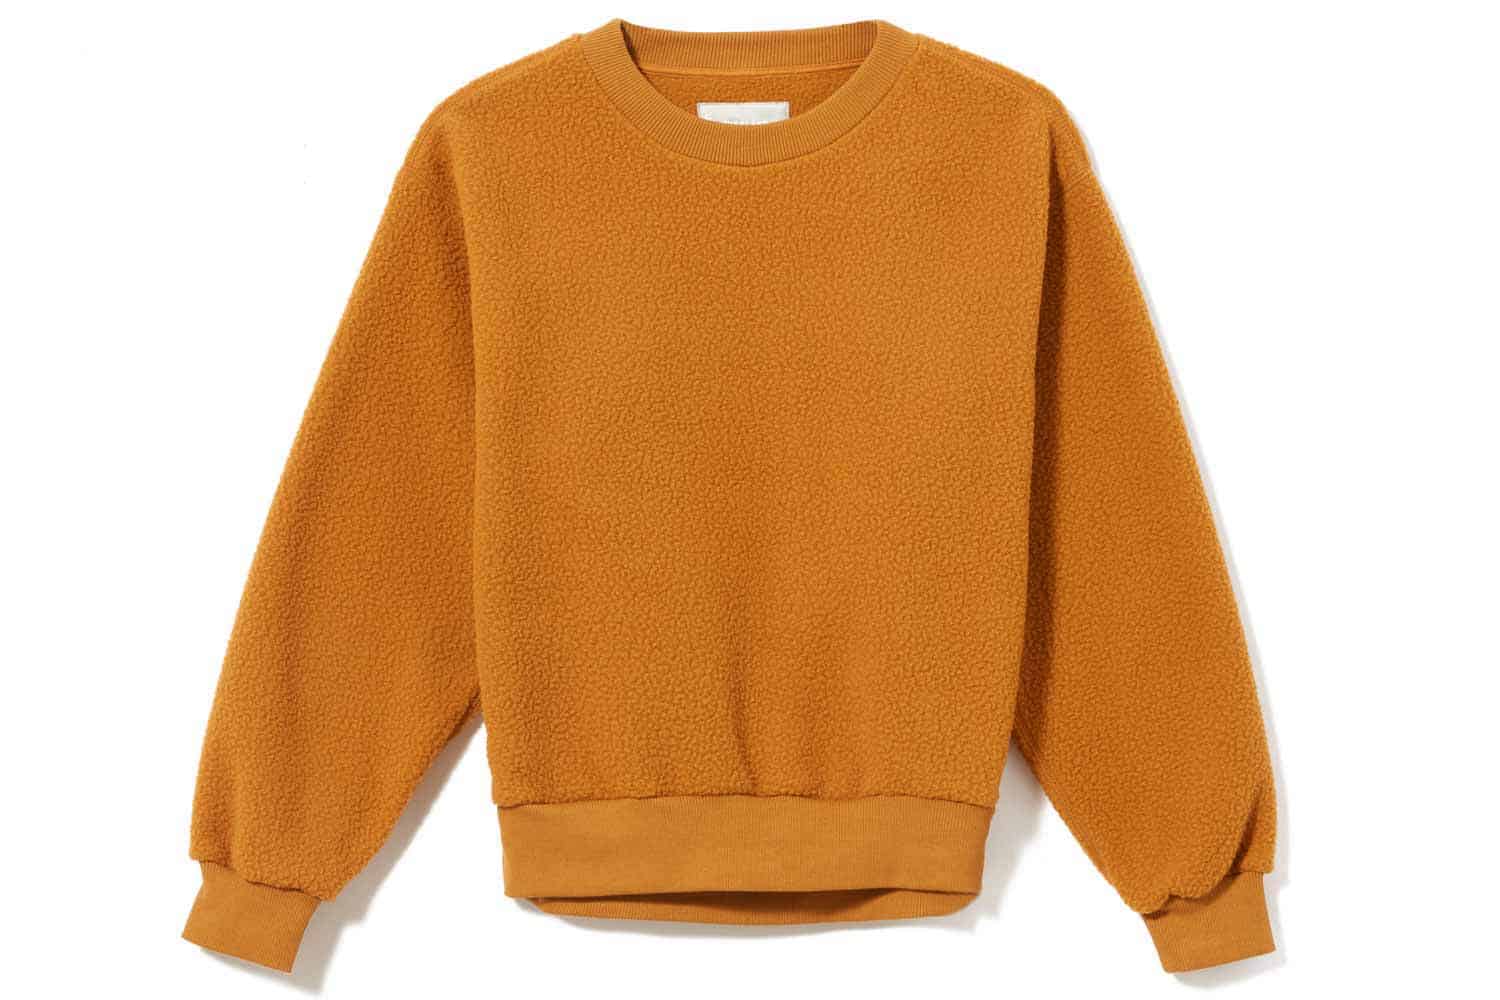 Editor's Pick: Everlane's Fleece Sweater Made of Recycled Plastic Bottles